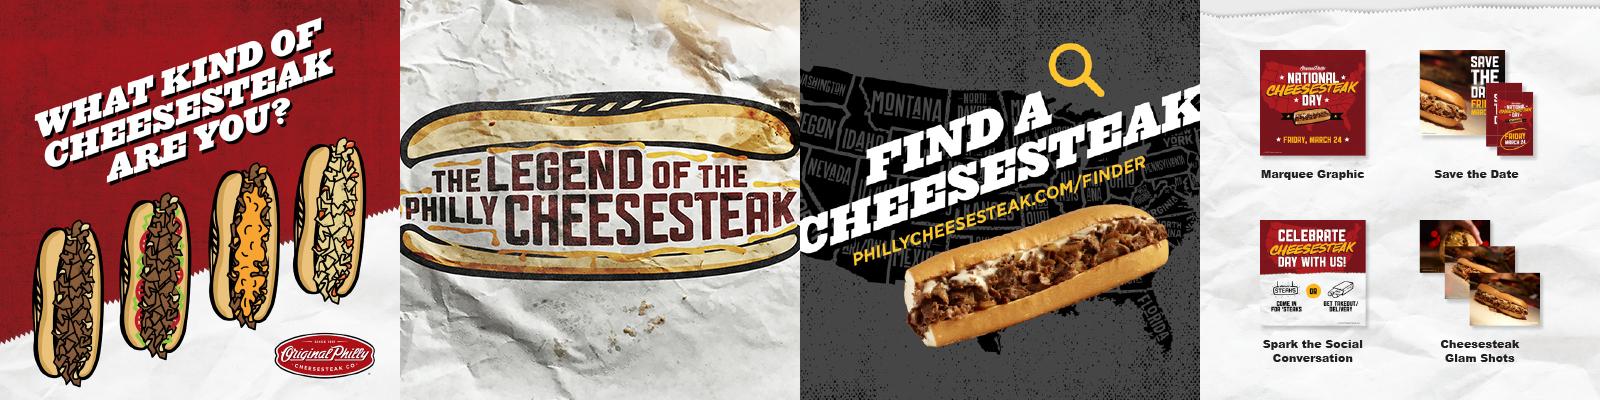 National Cheesesteak Day initiatives